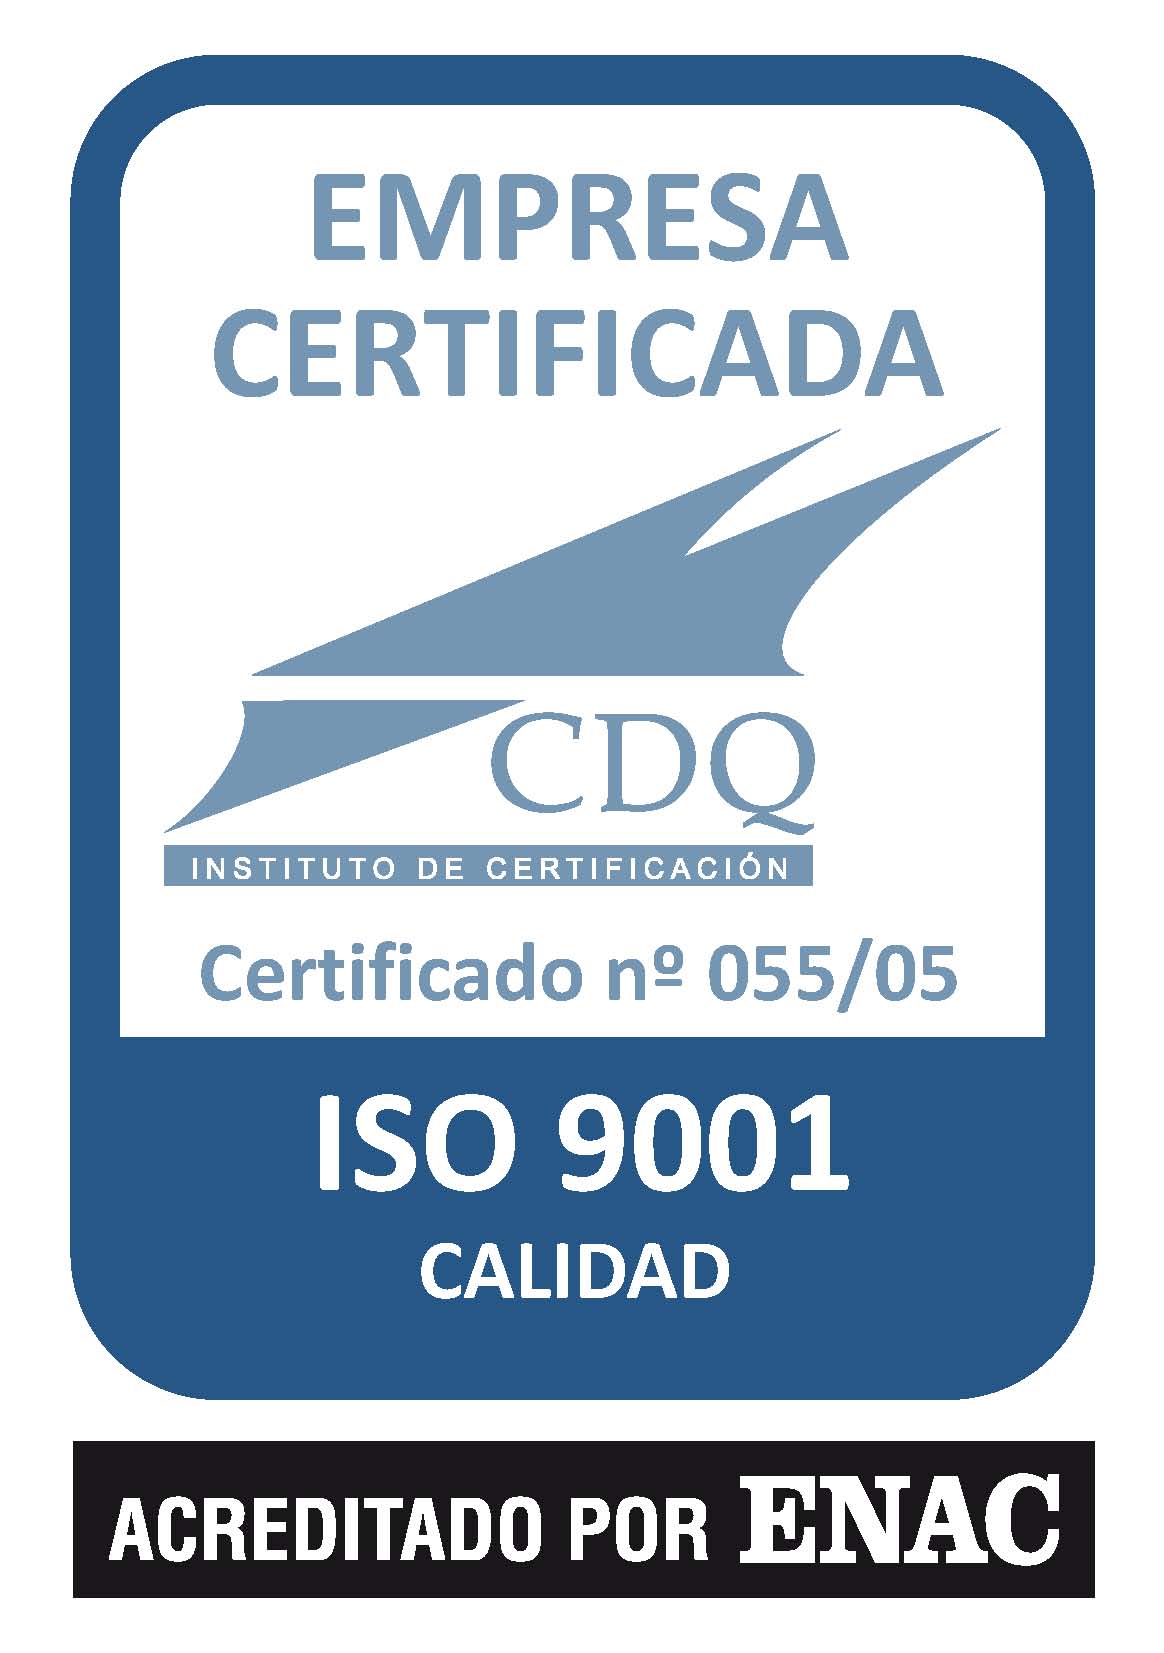 Datapro renews its ISO 9001 for meter reading and audit services, and expands it with grid captures